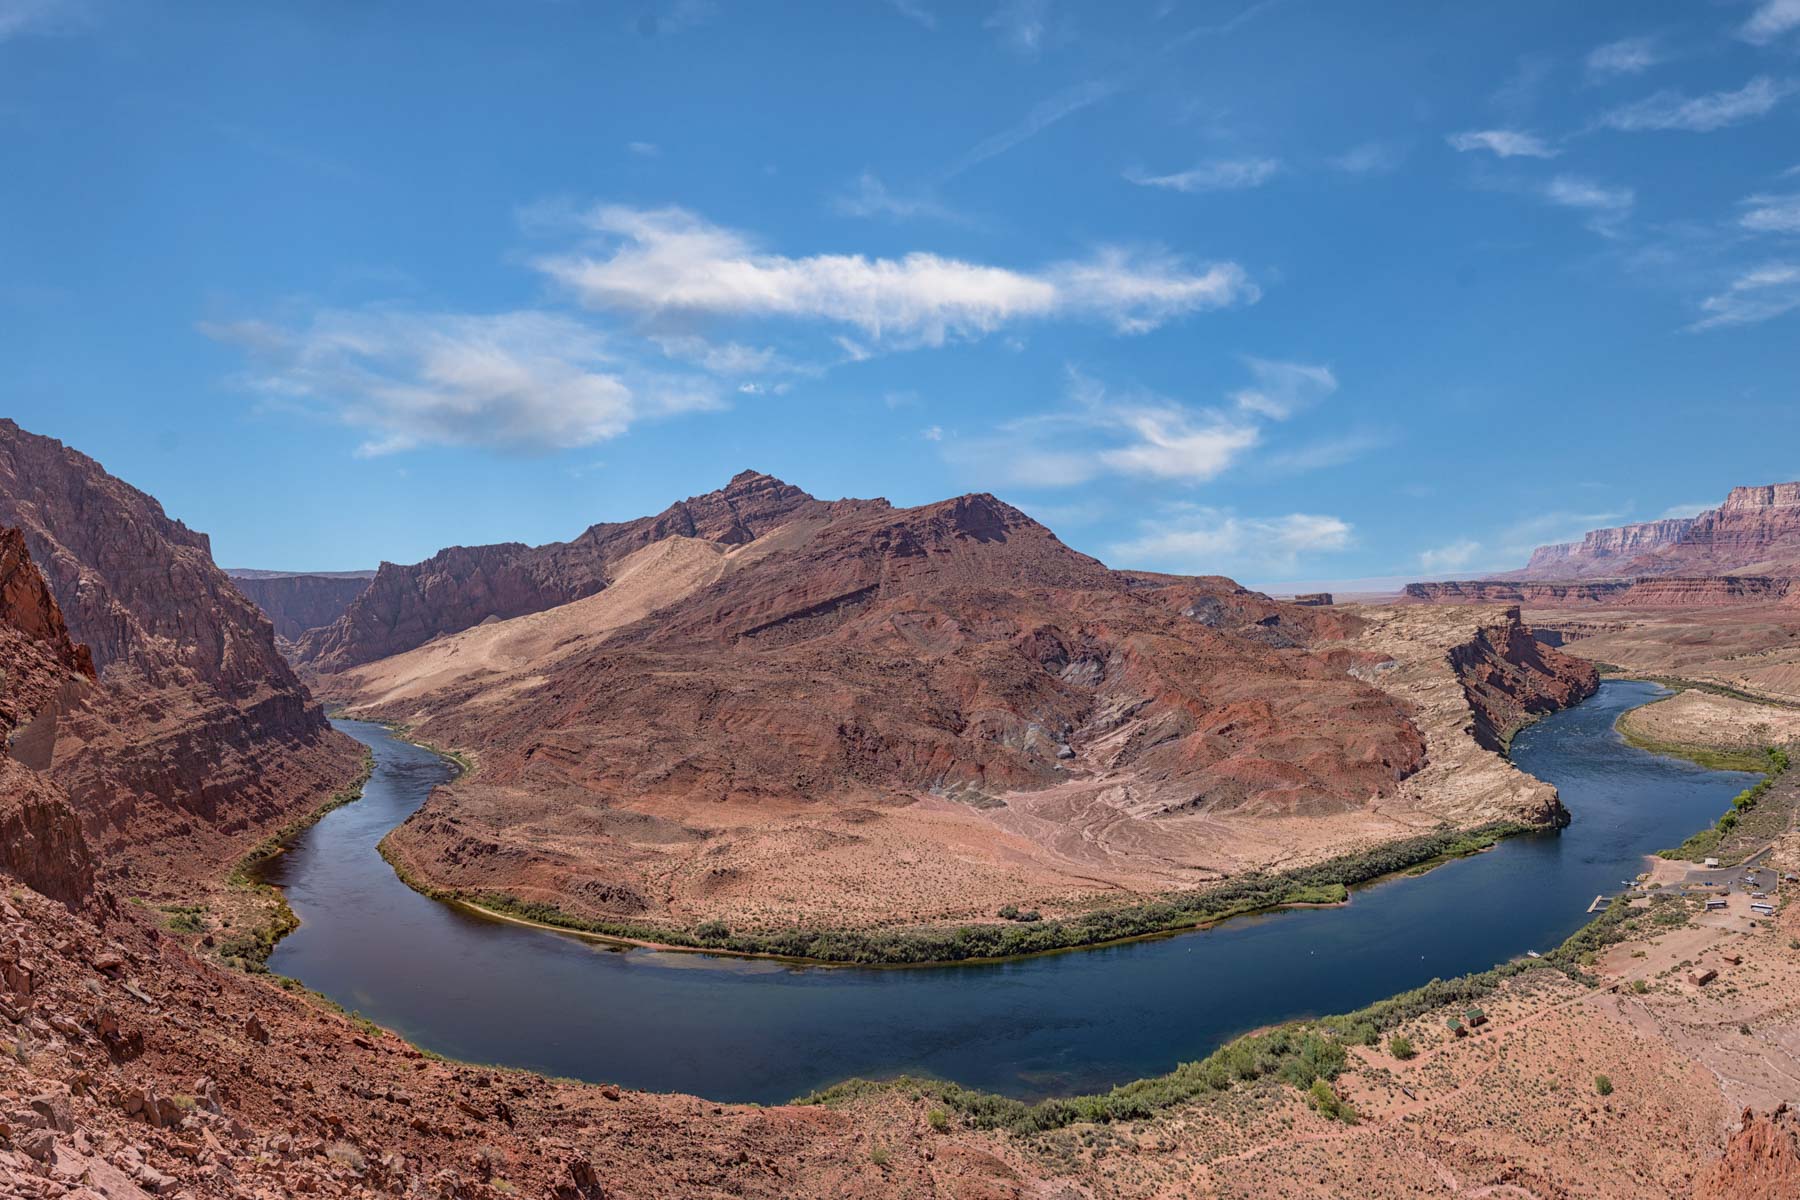 Bend in the Colorado River at Lees Ferry, Arizona